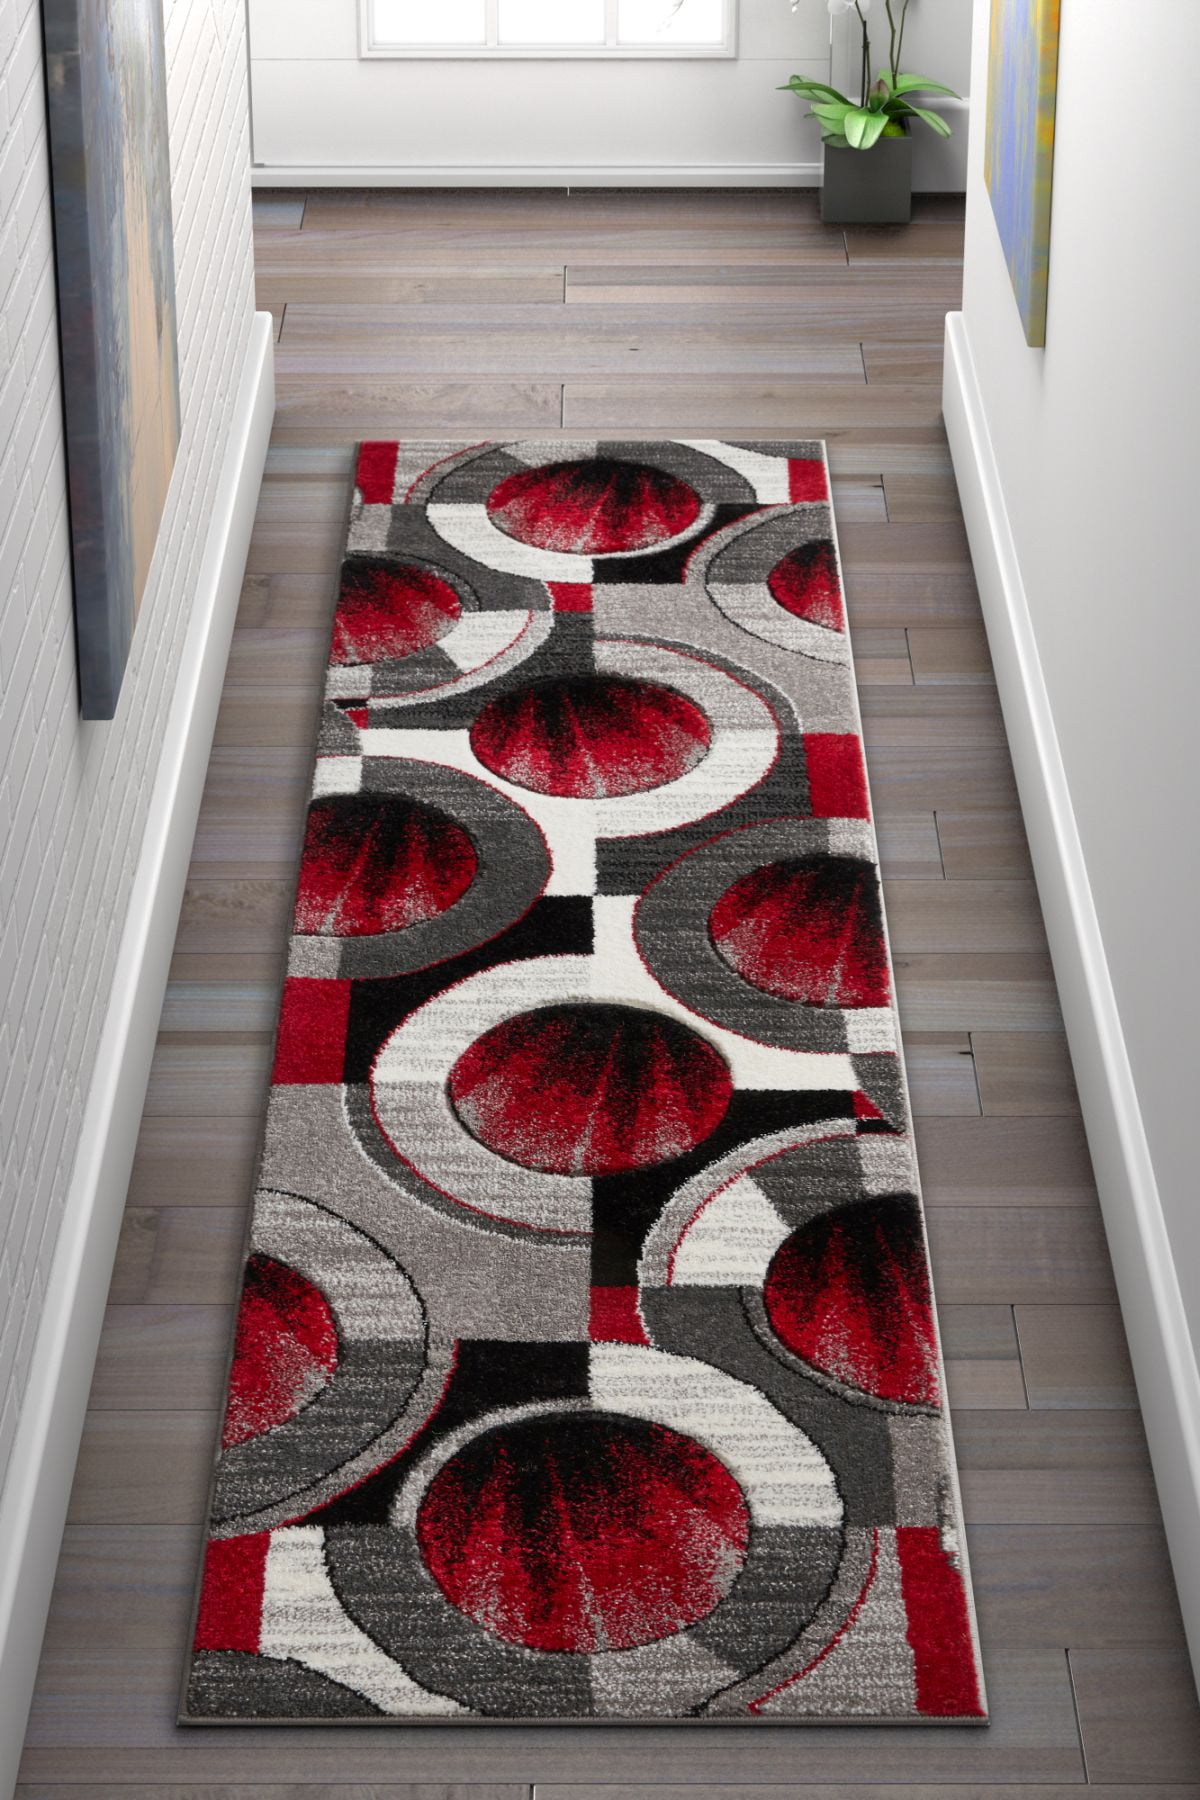 2' x 3' Abstract Brights Sunburst Scatter Rug - 385375